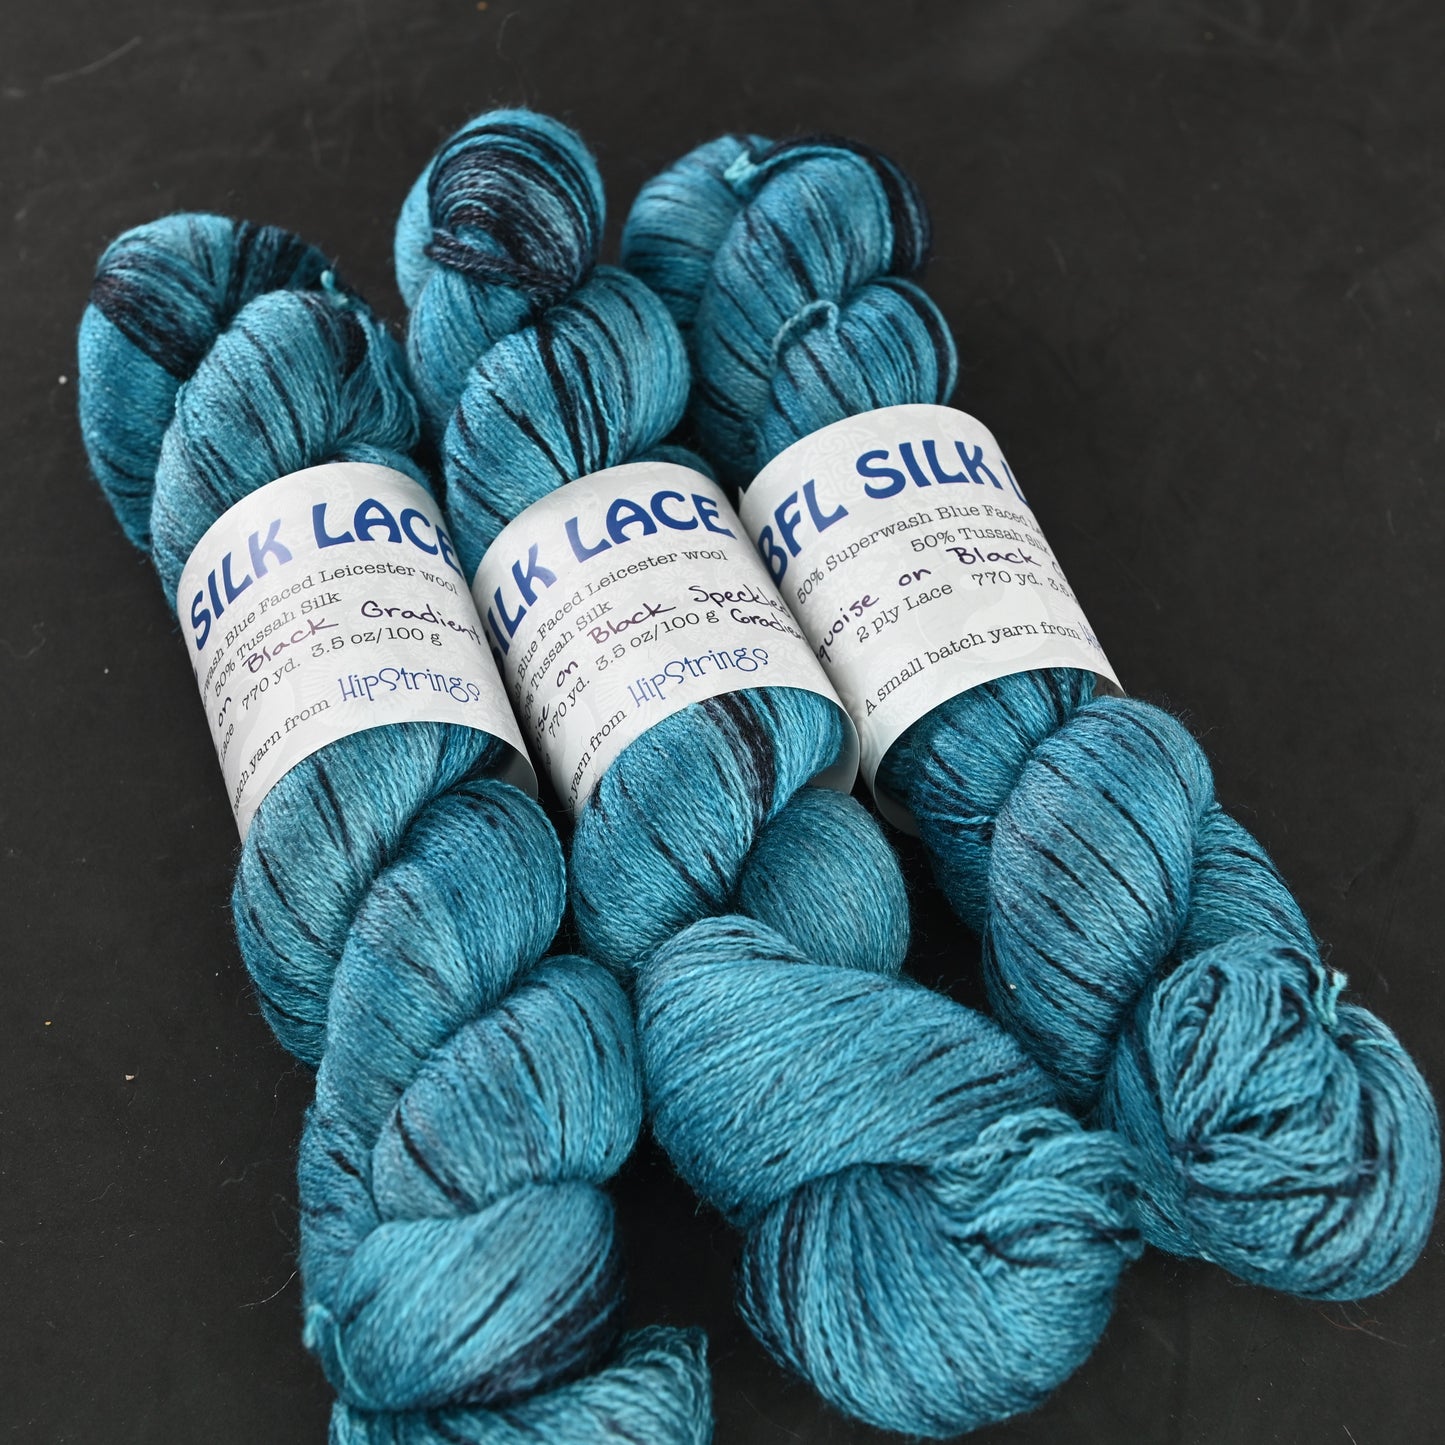 Turquoise on Black Gradient on Hand Dyed SW BFL Silk Lace Yarn - 100g